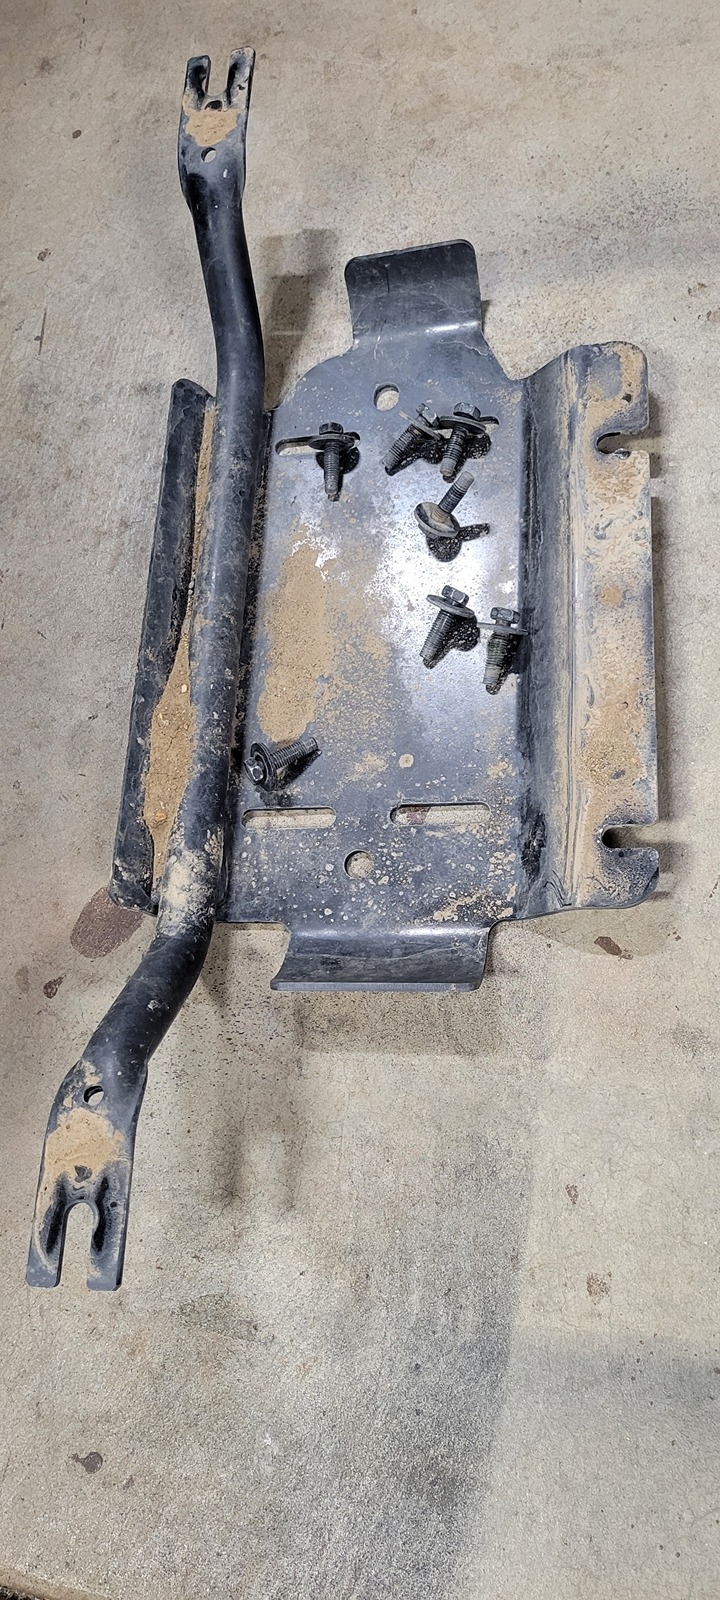 Ford Bronco Is the factory tranny skid plate available on its own? 1000006183